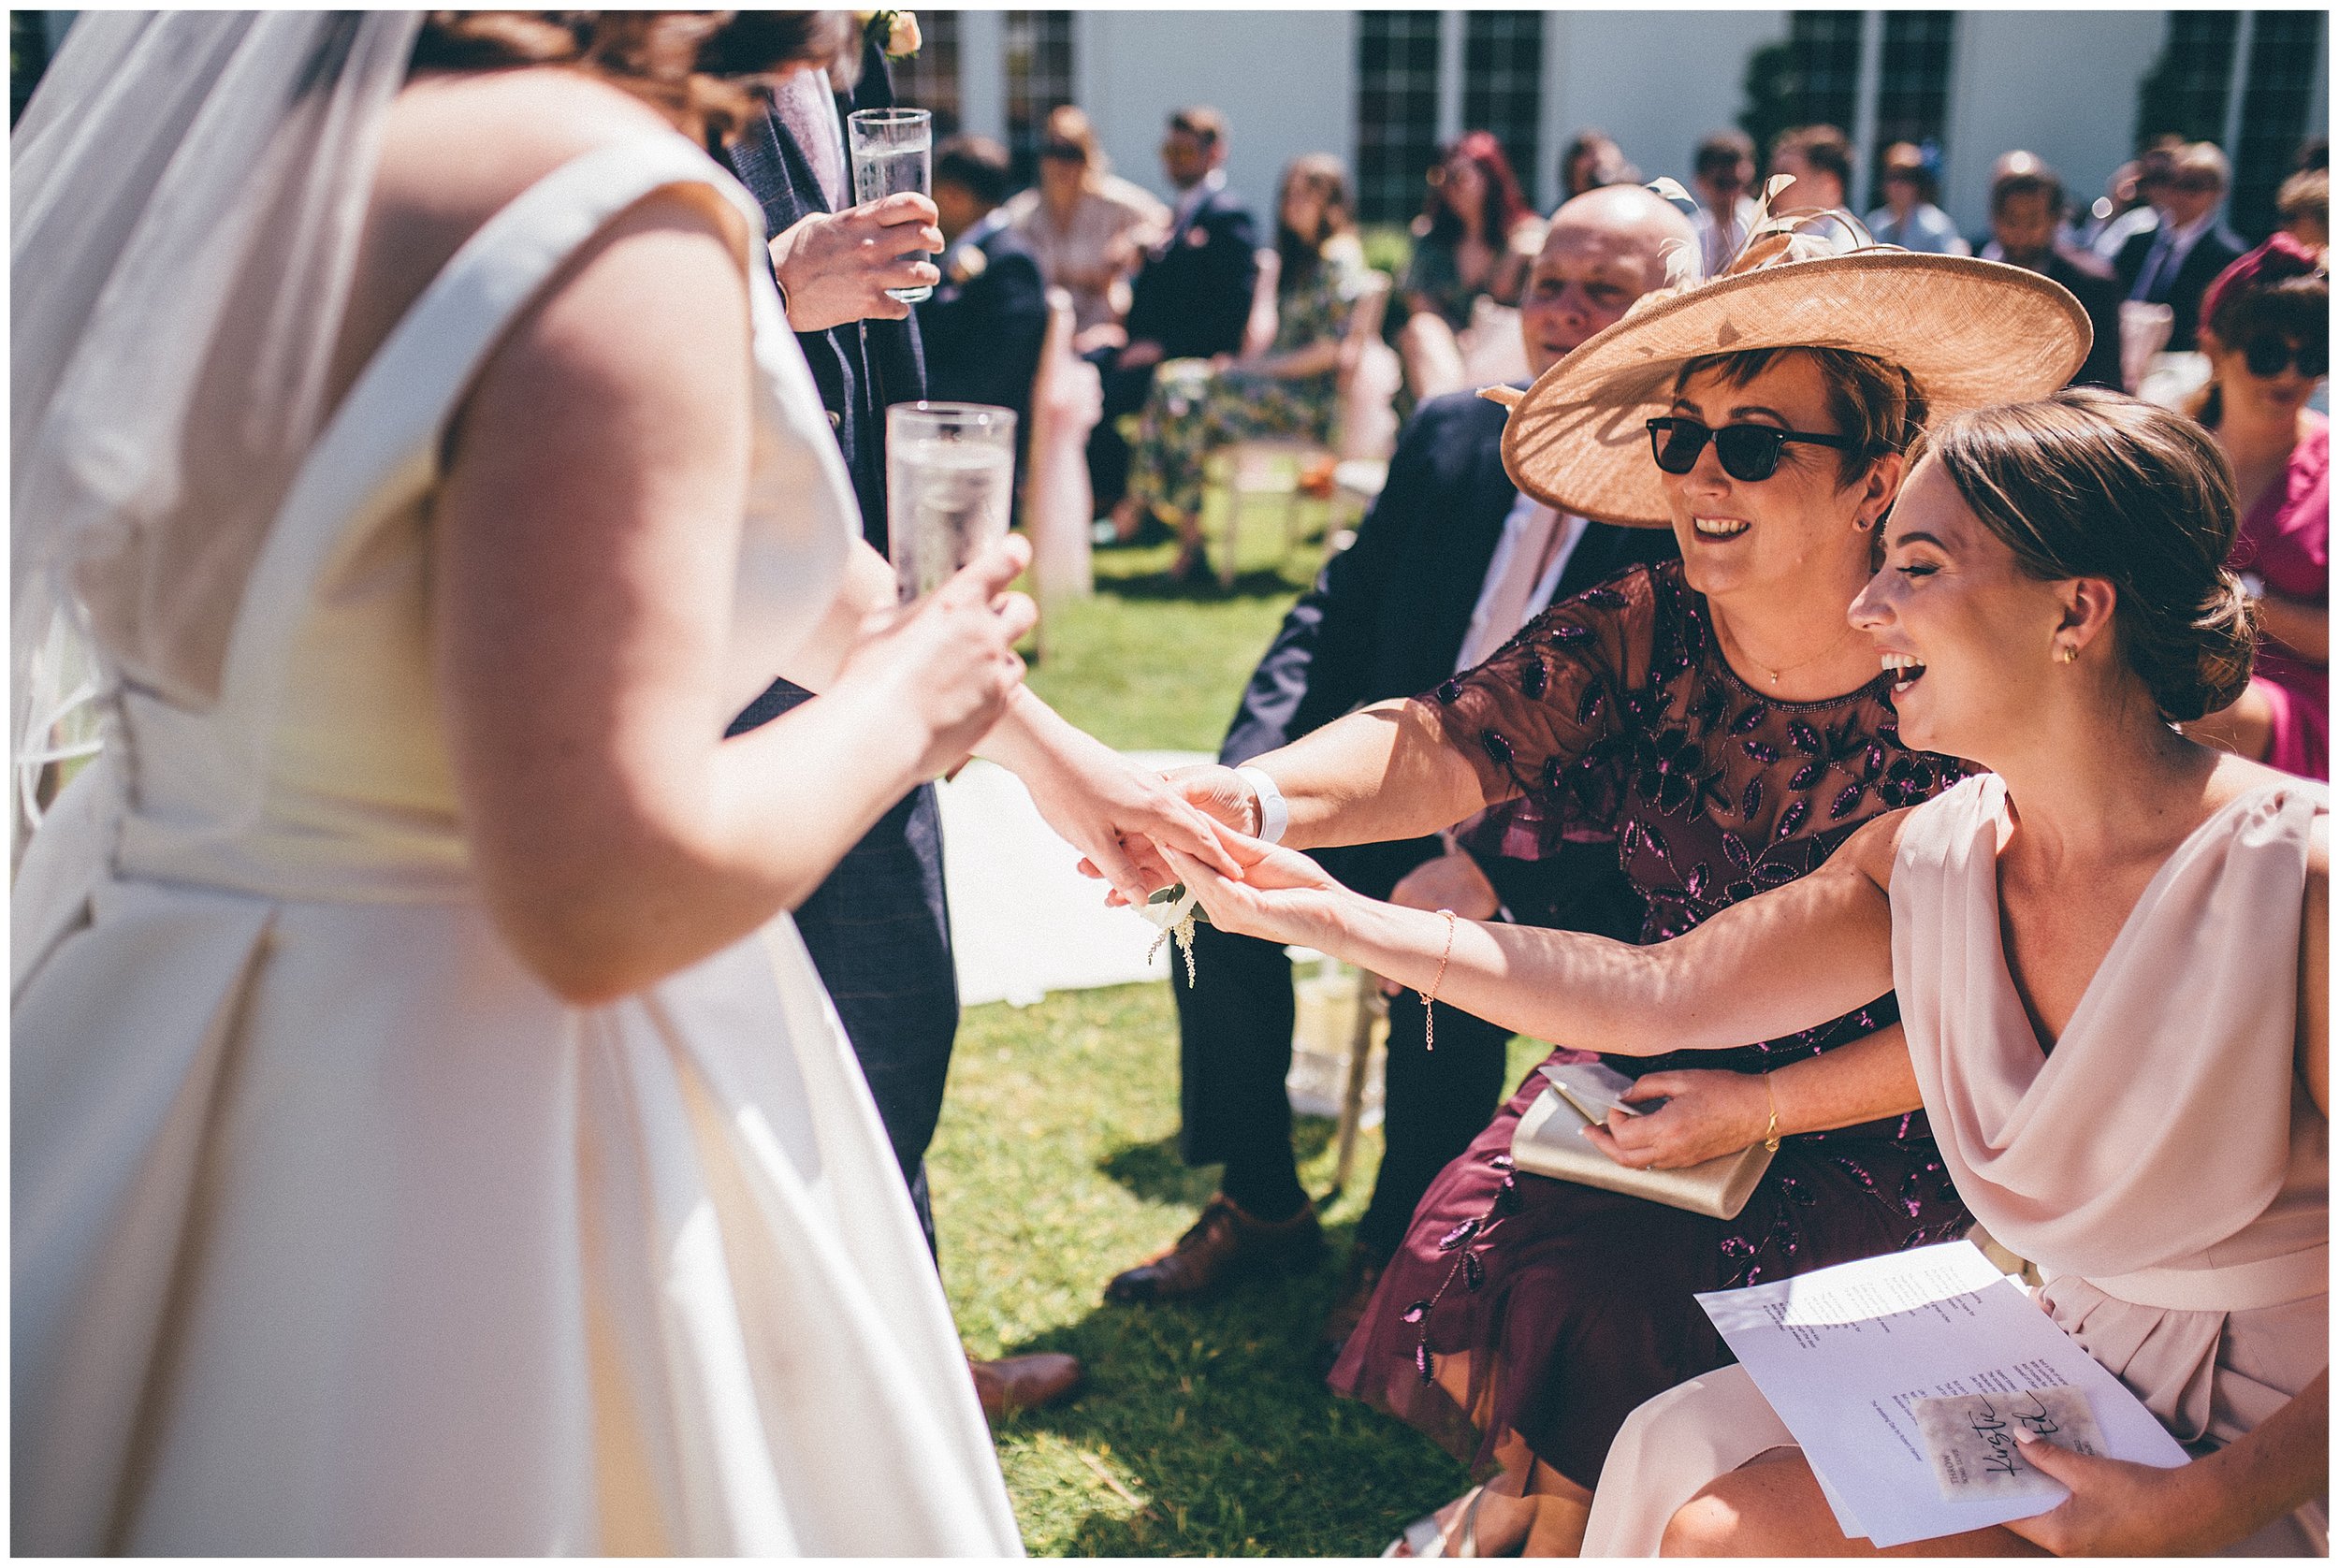 Wedding guests admire ride's wedding ring at Rowton Hall in Cheshire